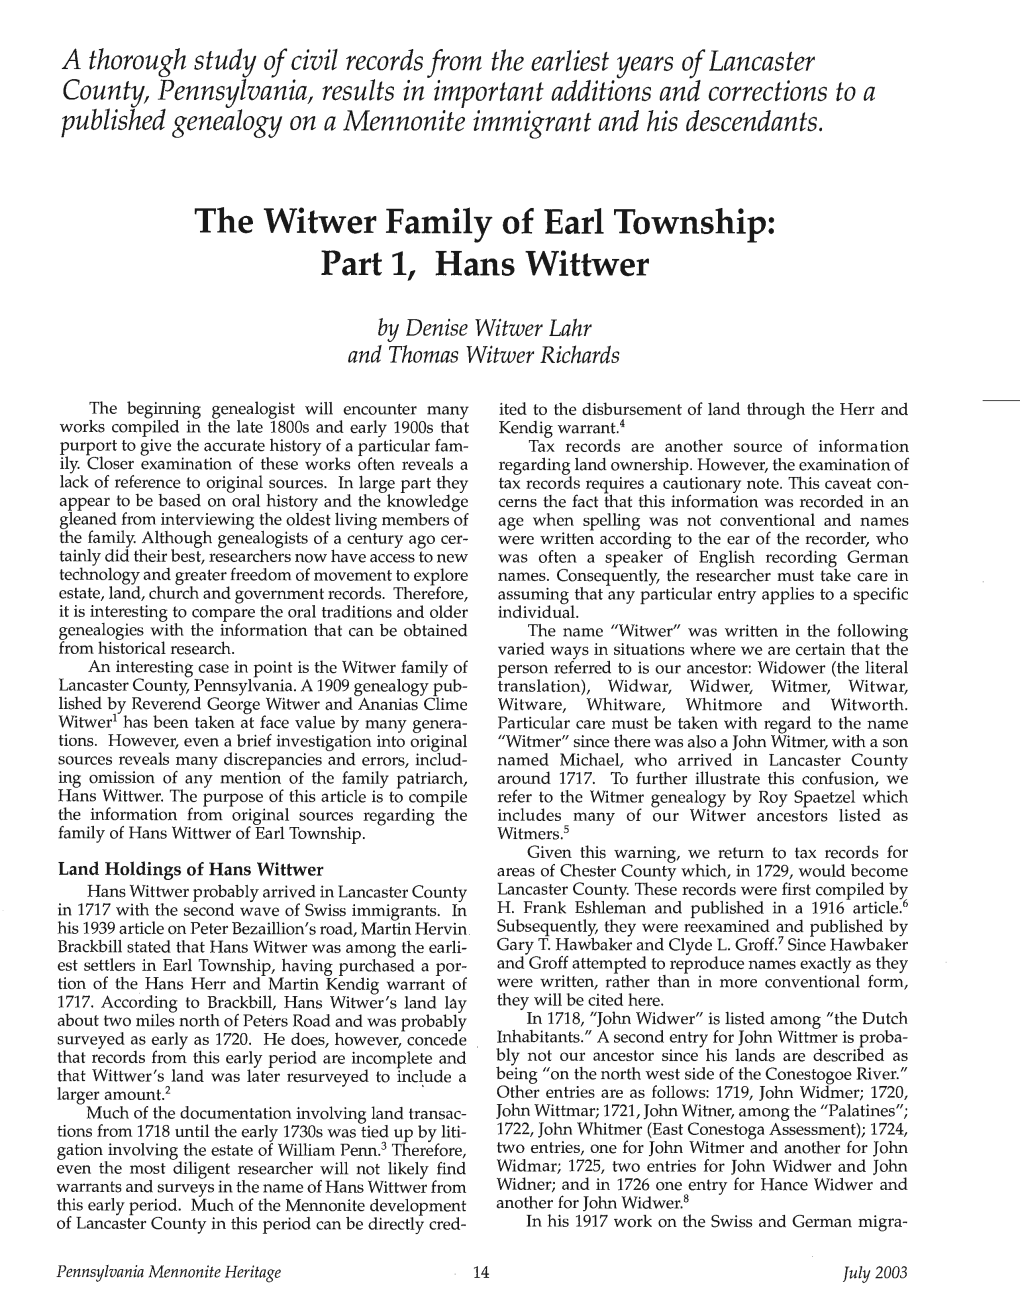 The Witwer Family of Earl Township: Part 1, Hans Wittwer